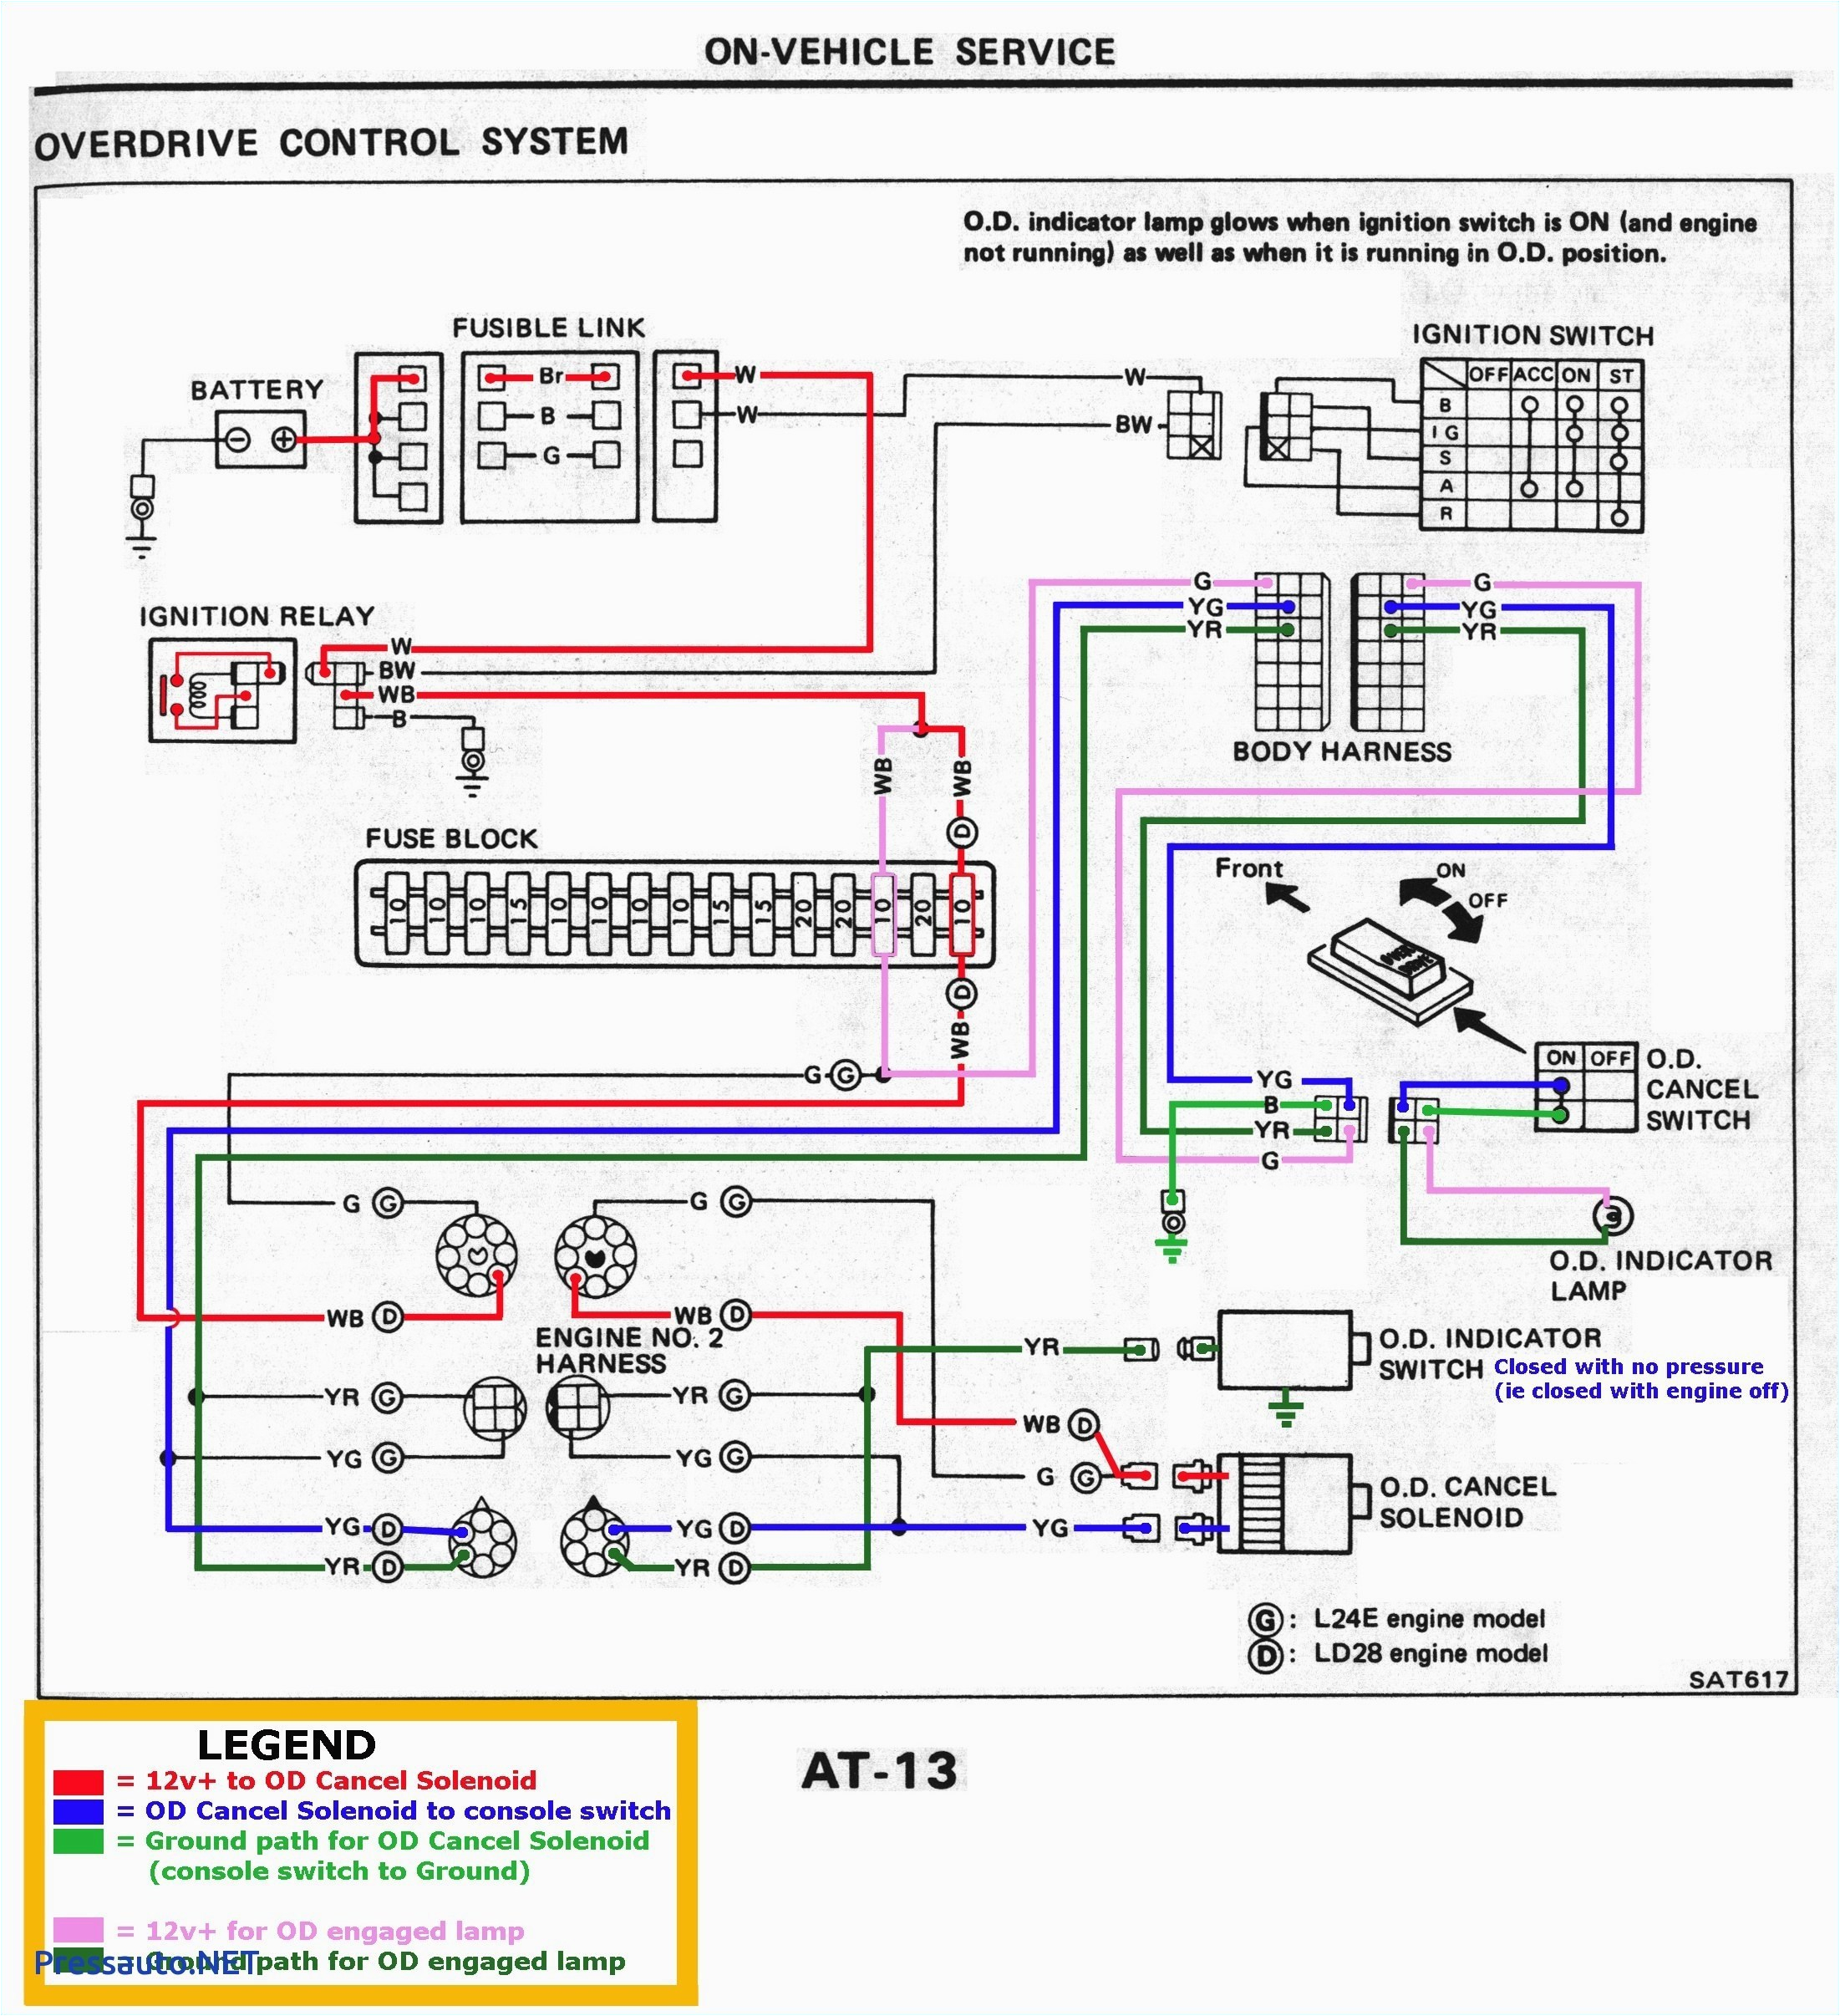 silverado horn wiring harness wiring diagram operations horn location for 2003 chevy silverado get free image about wiring